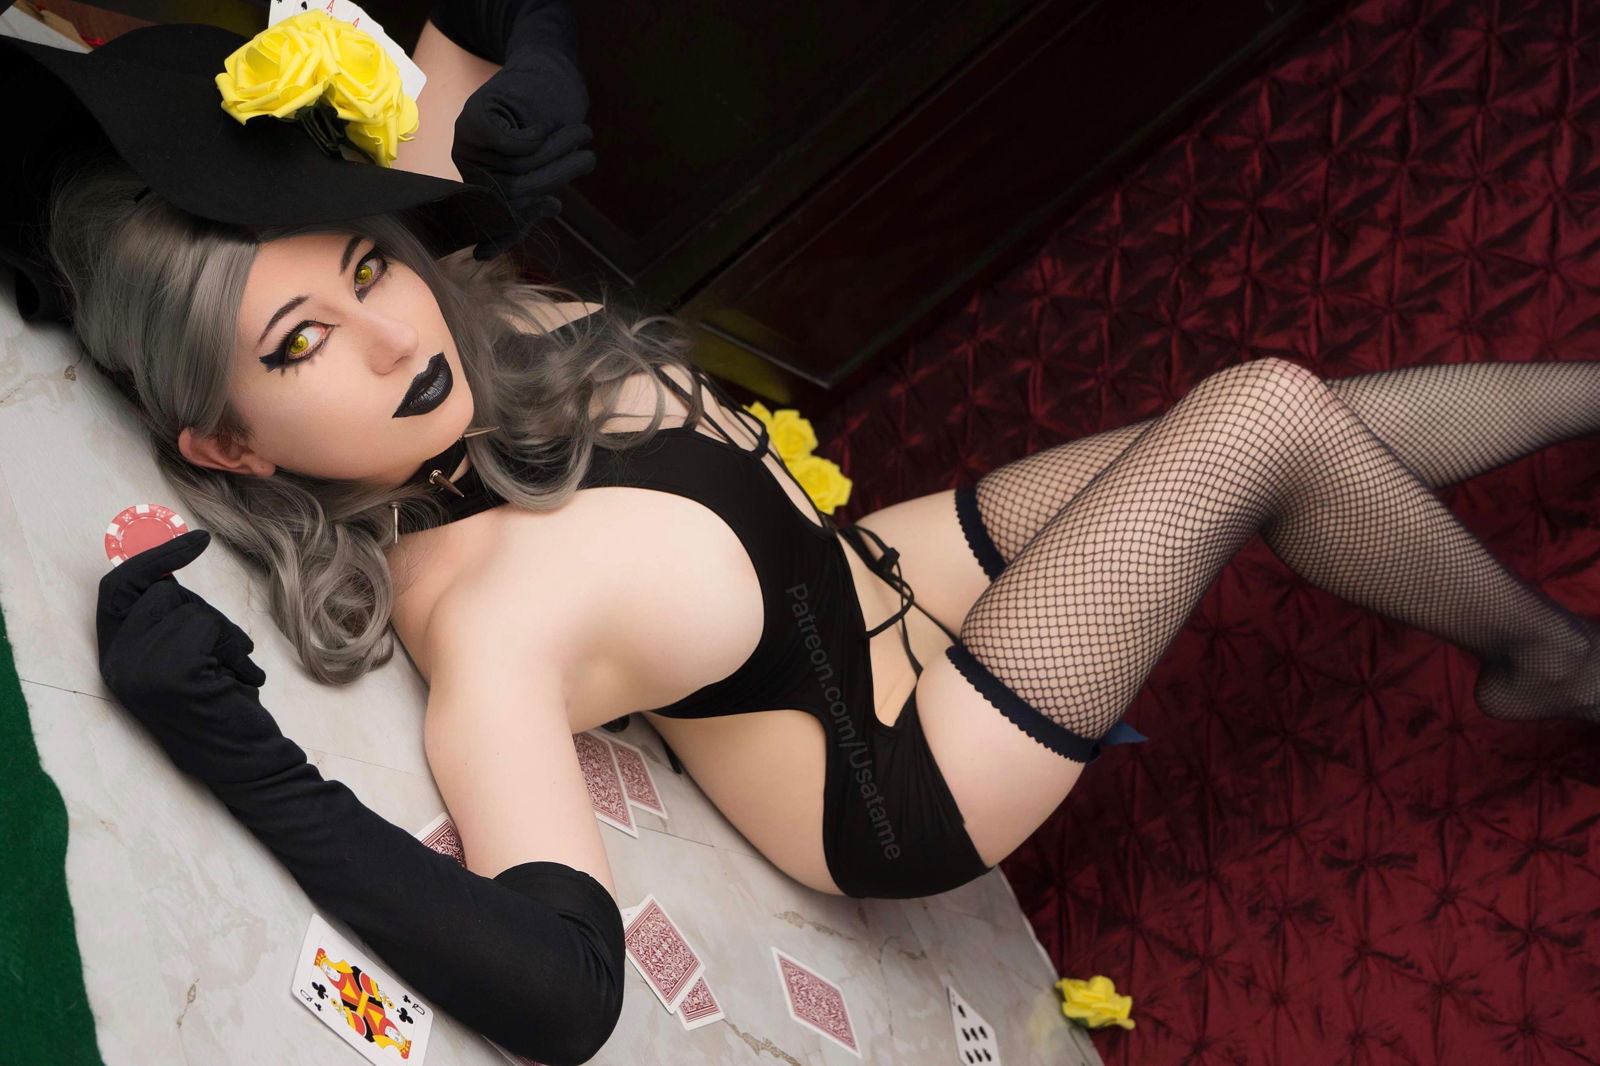 Photo by FapCosplay with the username @FapCosplay,  November 20, 2019 at 4:00 PM. The post is about the topic Fap Cosplay and the text says 'Shadow Sae lingerie by Usatame [OC]
#nsfwcosplay #sexycosplay #cosplaynudes #cosplaygirls #cosplay'